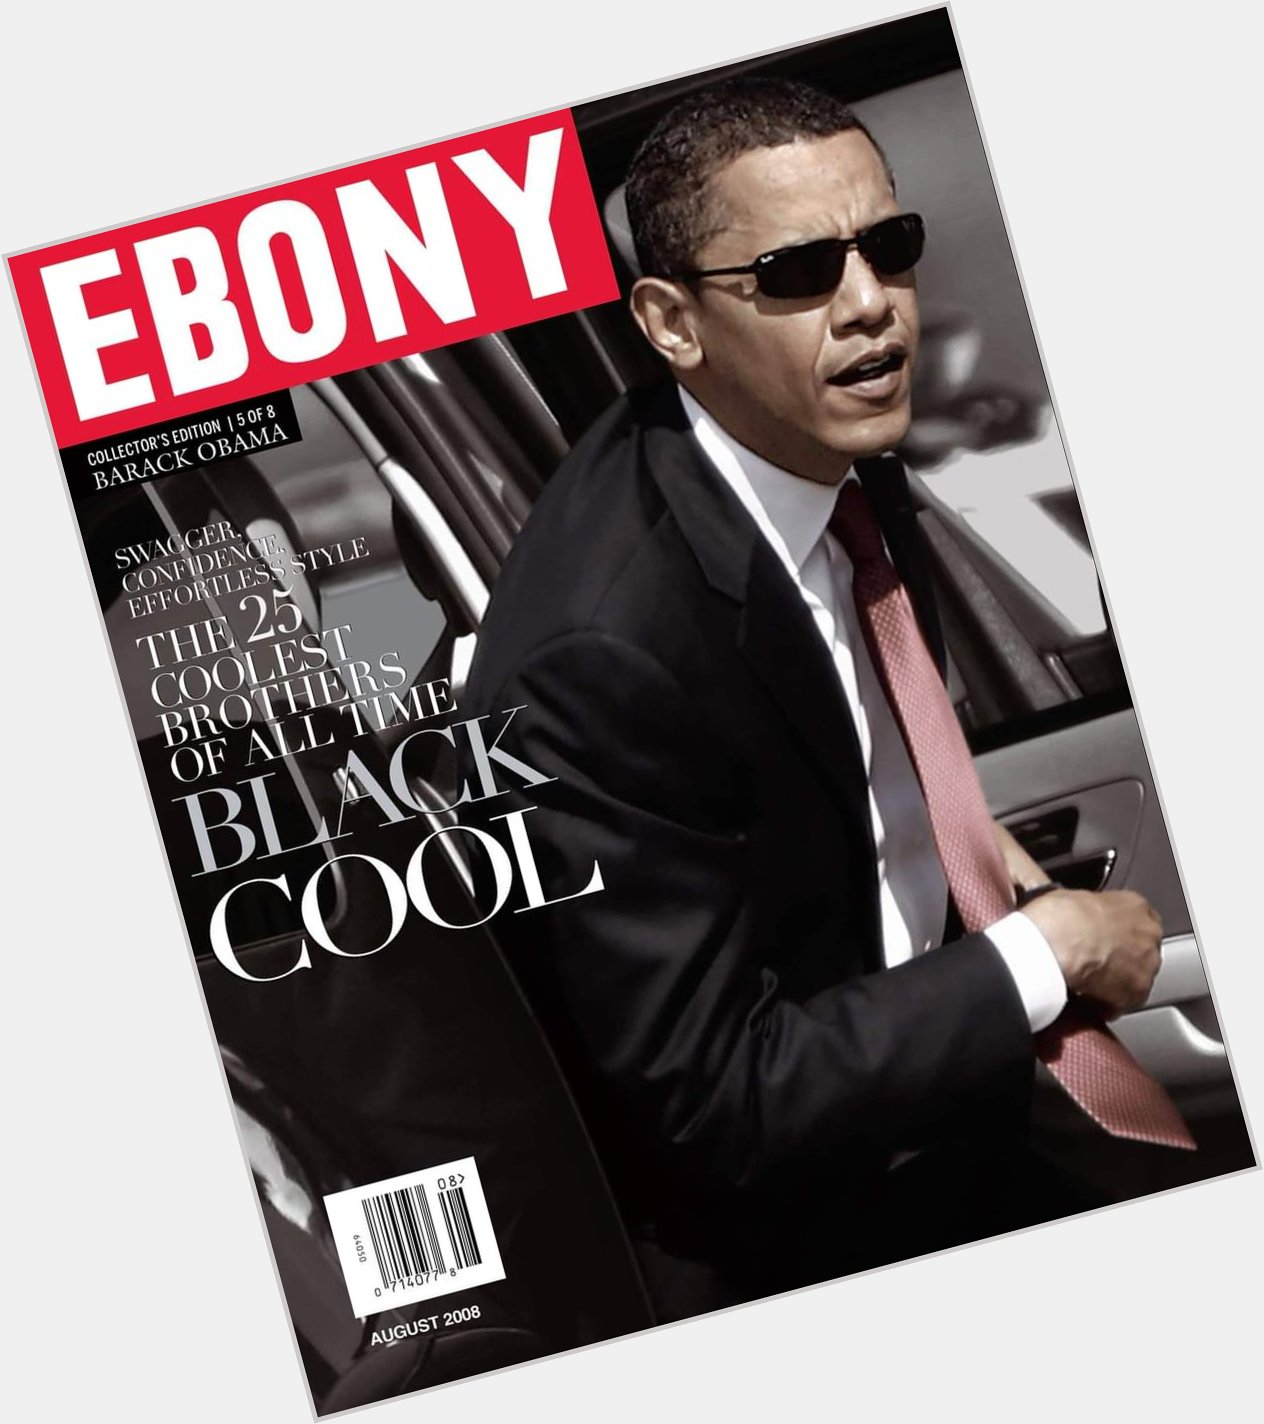 HAPPY 60TH BIRTHDAY PRESIDENT BARACK OBAMA THE GAME CHANGER! AY U CELEBRATE MANY MORE HEALTHY YEARS AHEAD     